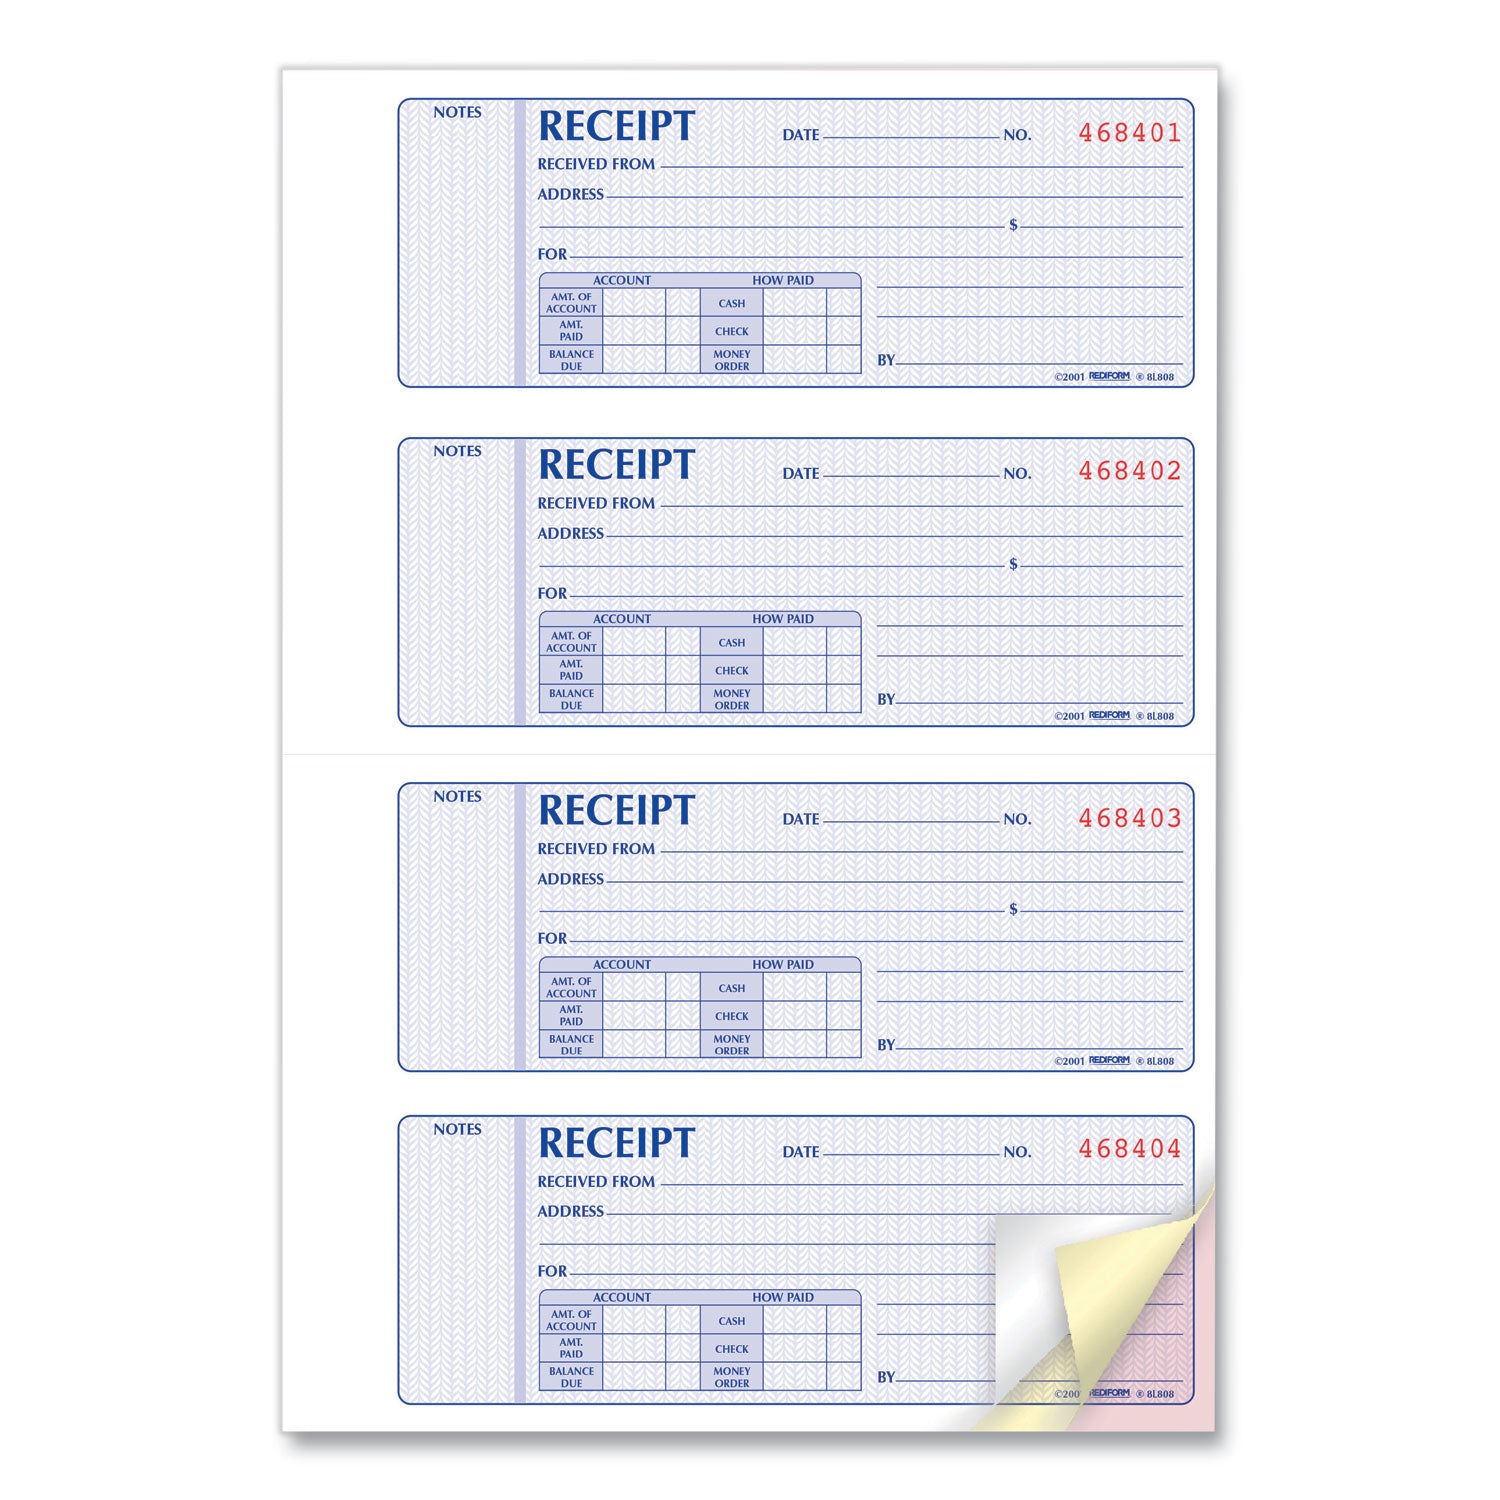 Money Receipt Book, Softcover, Three-Part Carbonless, 7 x 2.75, 4 Forms/Sheet, 100 Forms Total - 